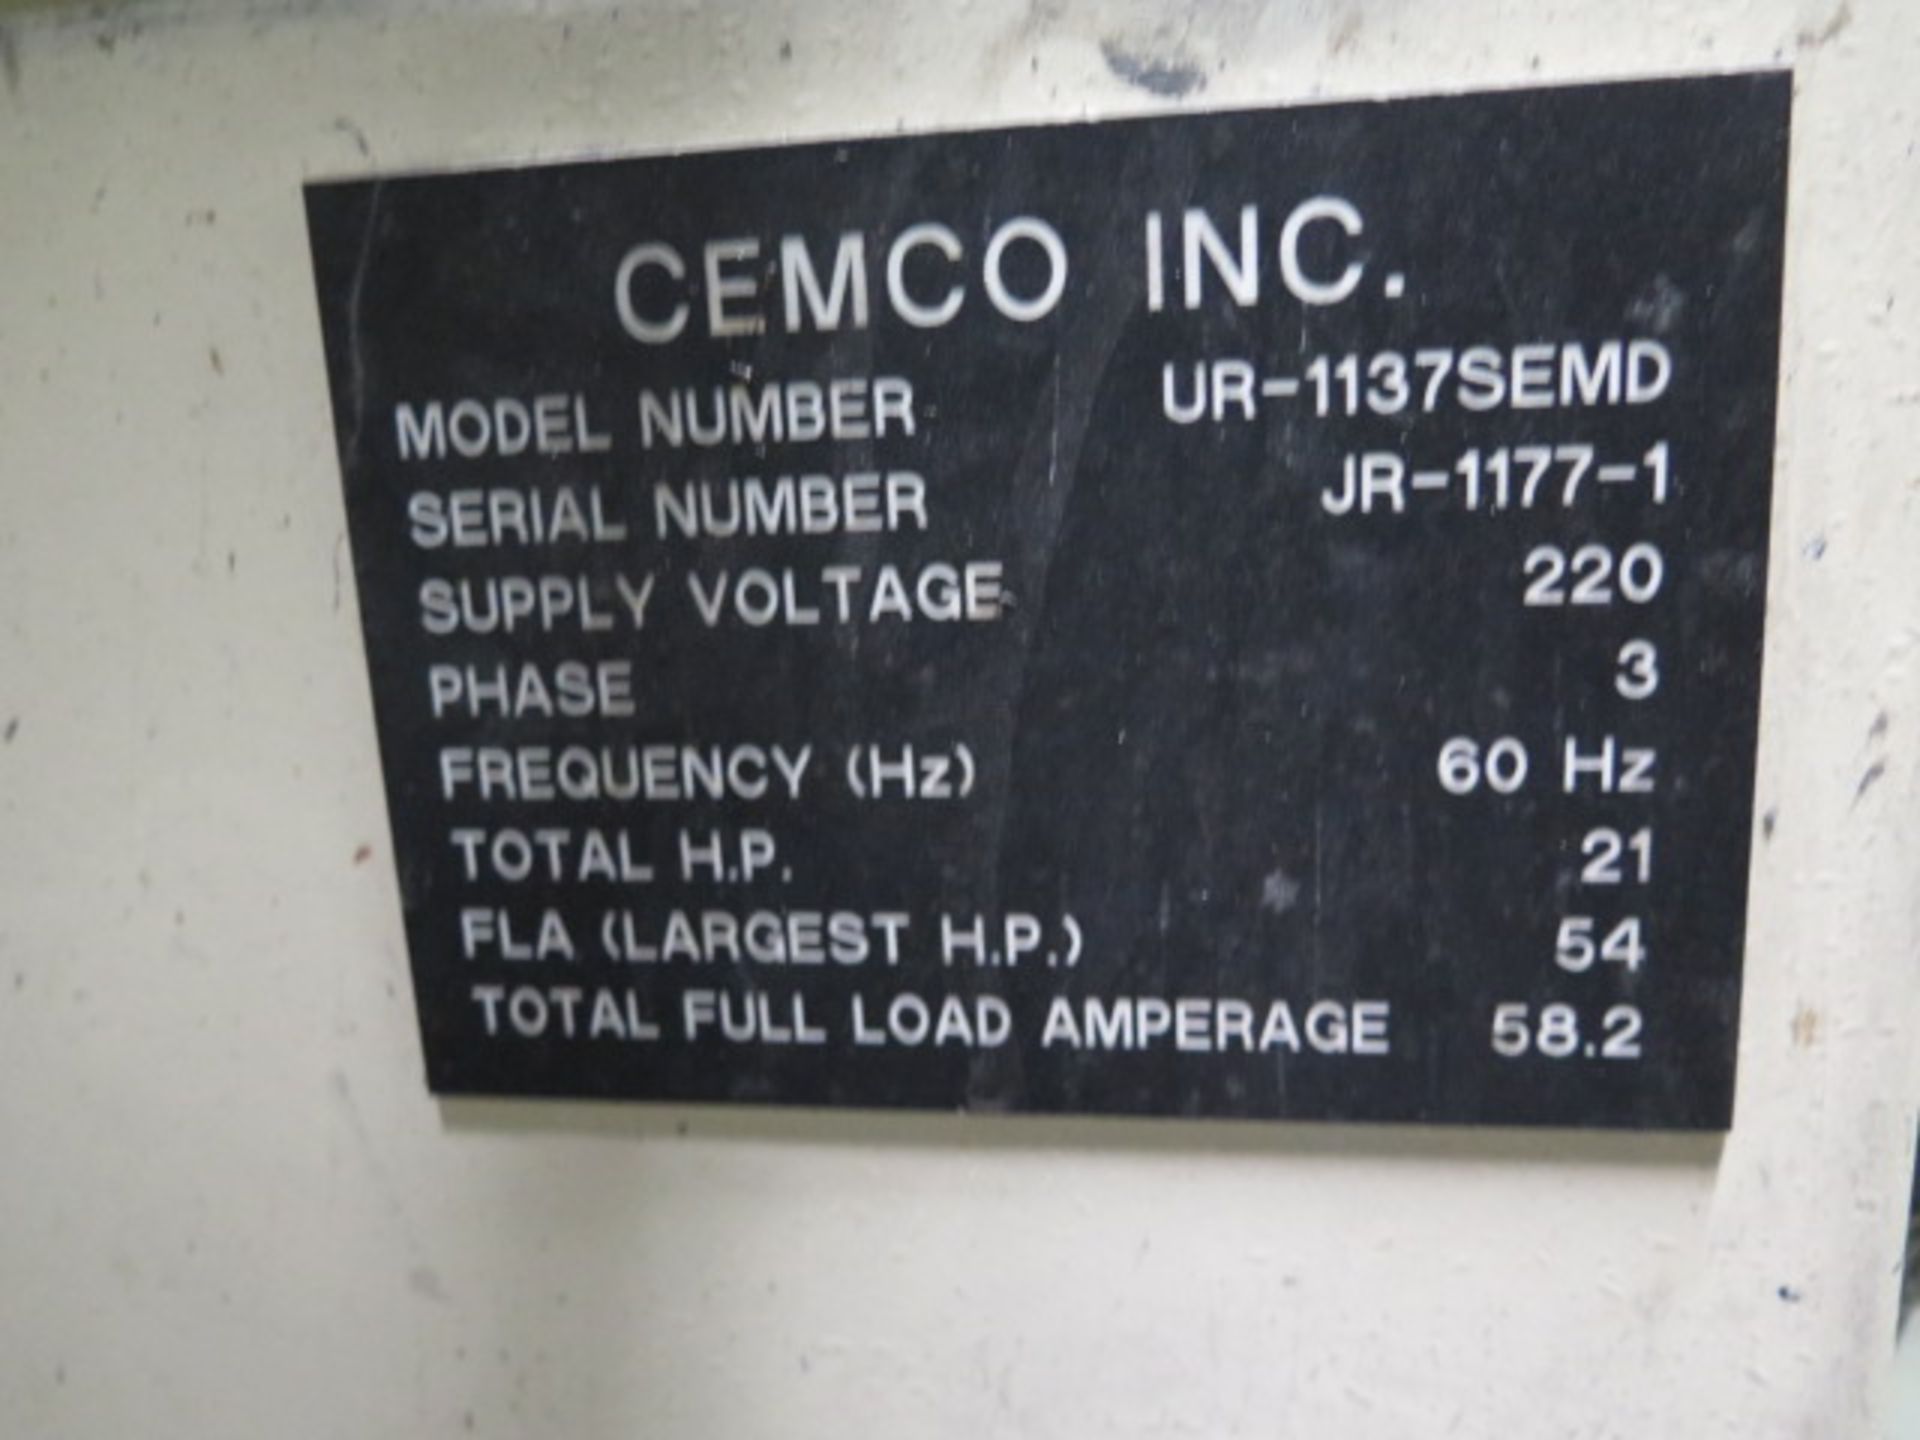 Cemco 1000 mdl. UR-1137SEMD 36" Belt Grainer s/n JR-1177-1 w/ Rand Bright dust collector, SOLD AS IS - Image 10 of 18